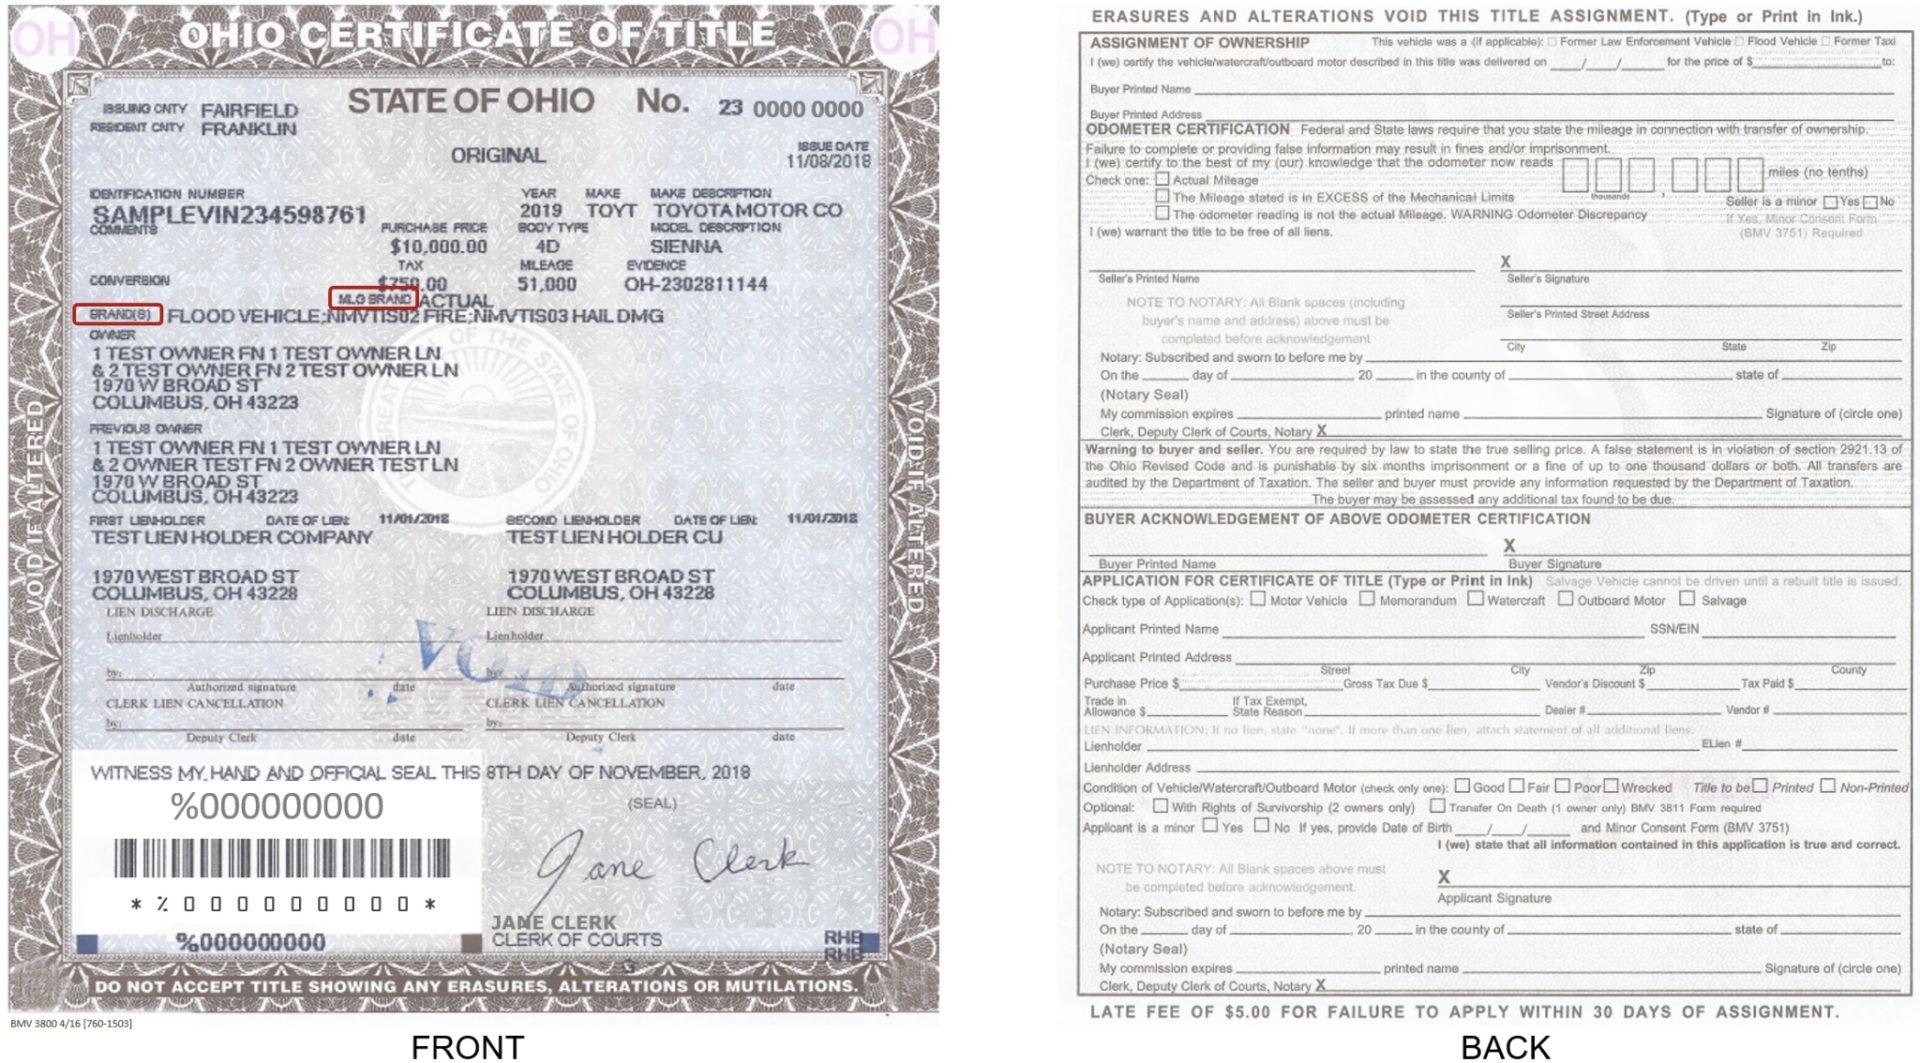 certificate of title and assignment